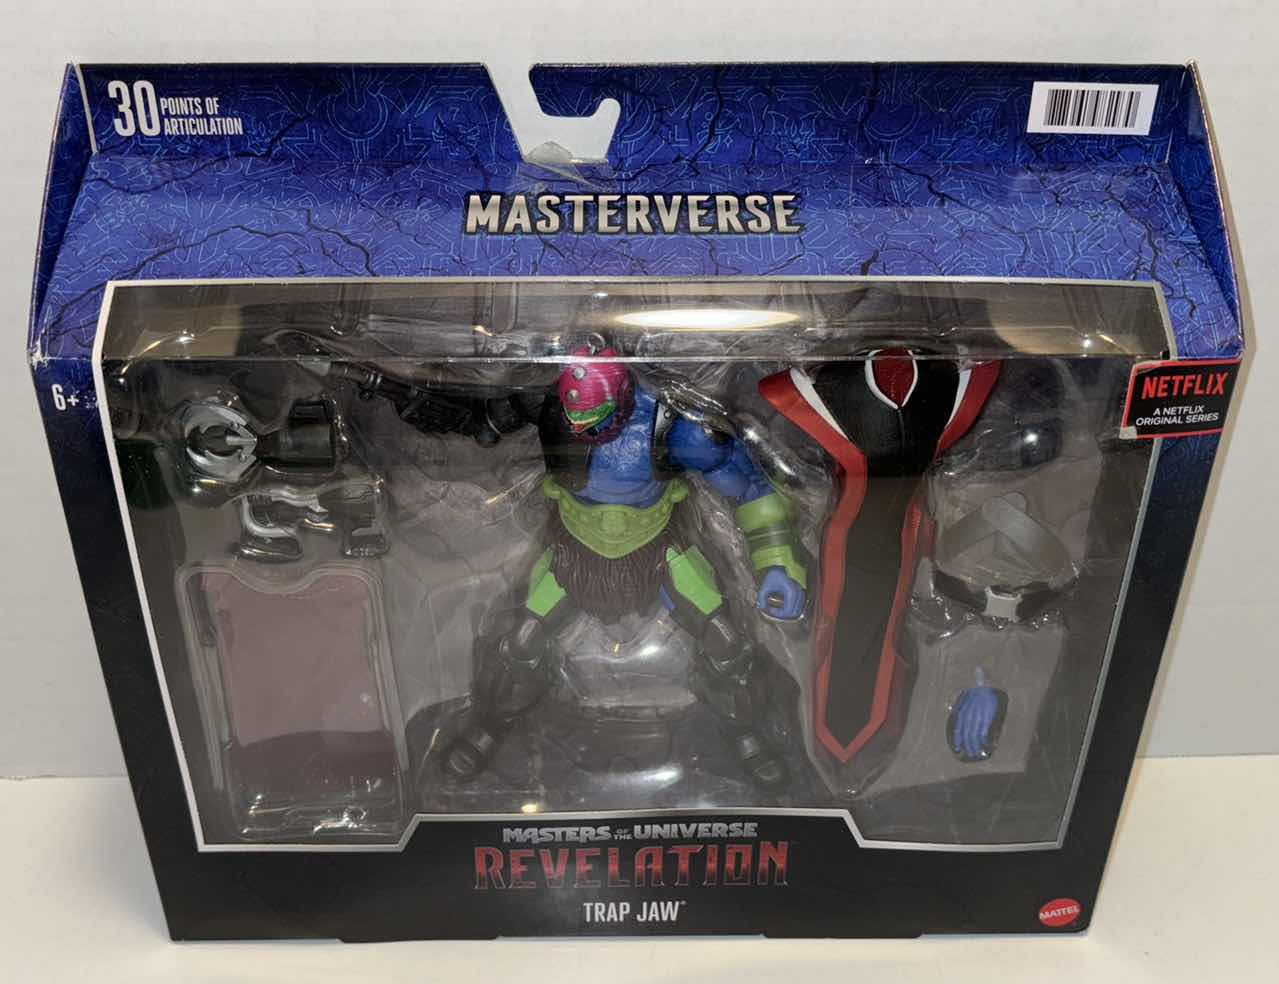 Photo 1 of NEW MATTEL MASTERVERSE MASTERS OF THE UNIVERSE REVELATION “TRAP JAW” ACTION FIGURE & ACCESSORIES (1)